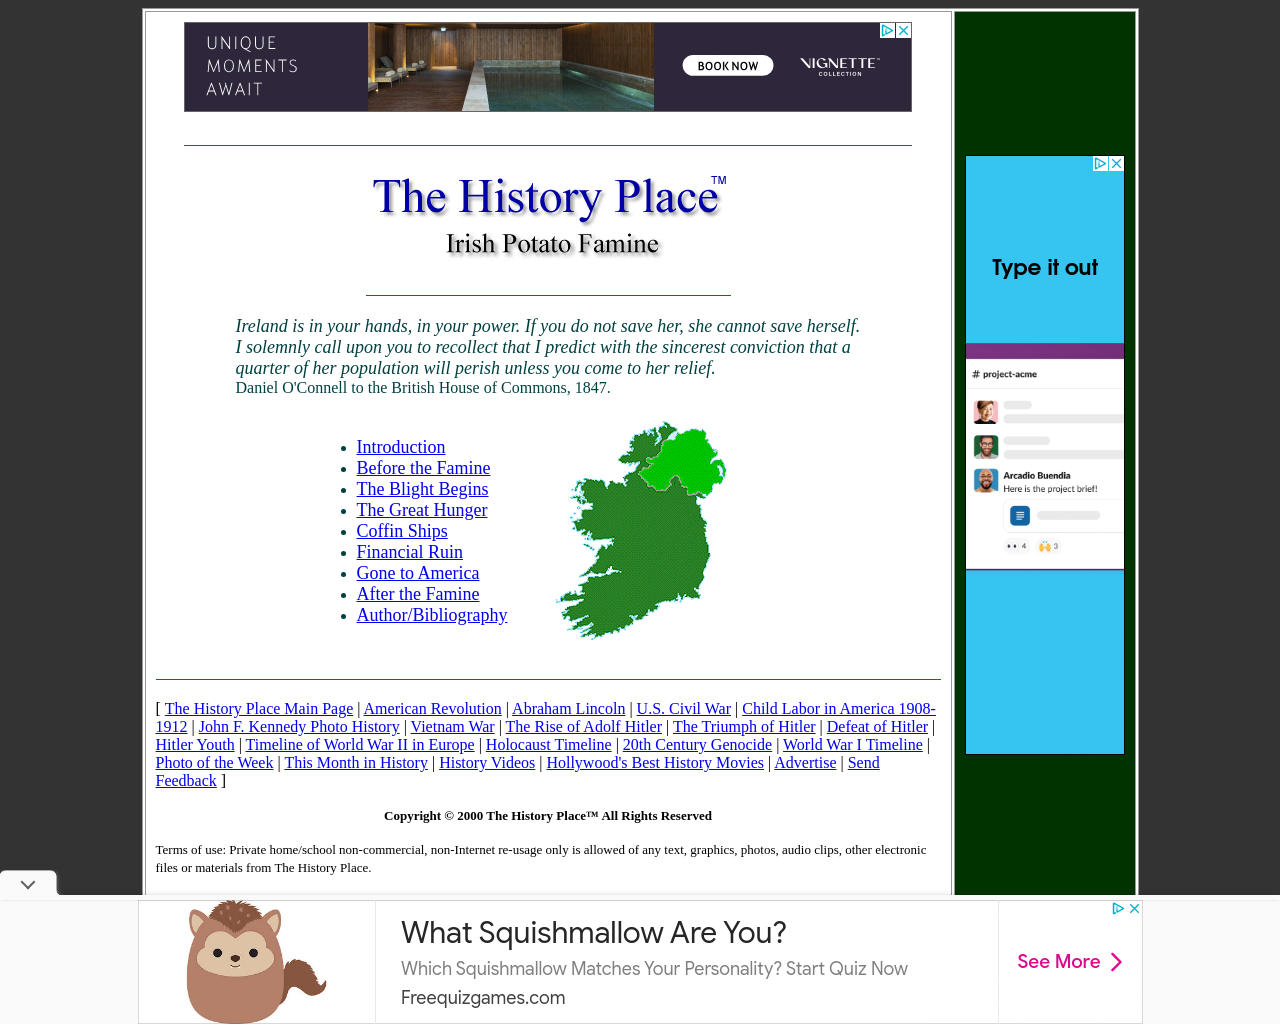 The Famine (historyplace.com)